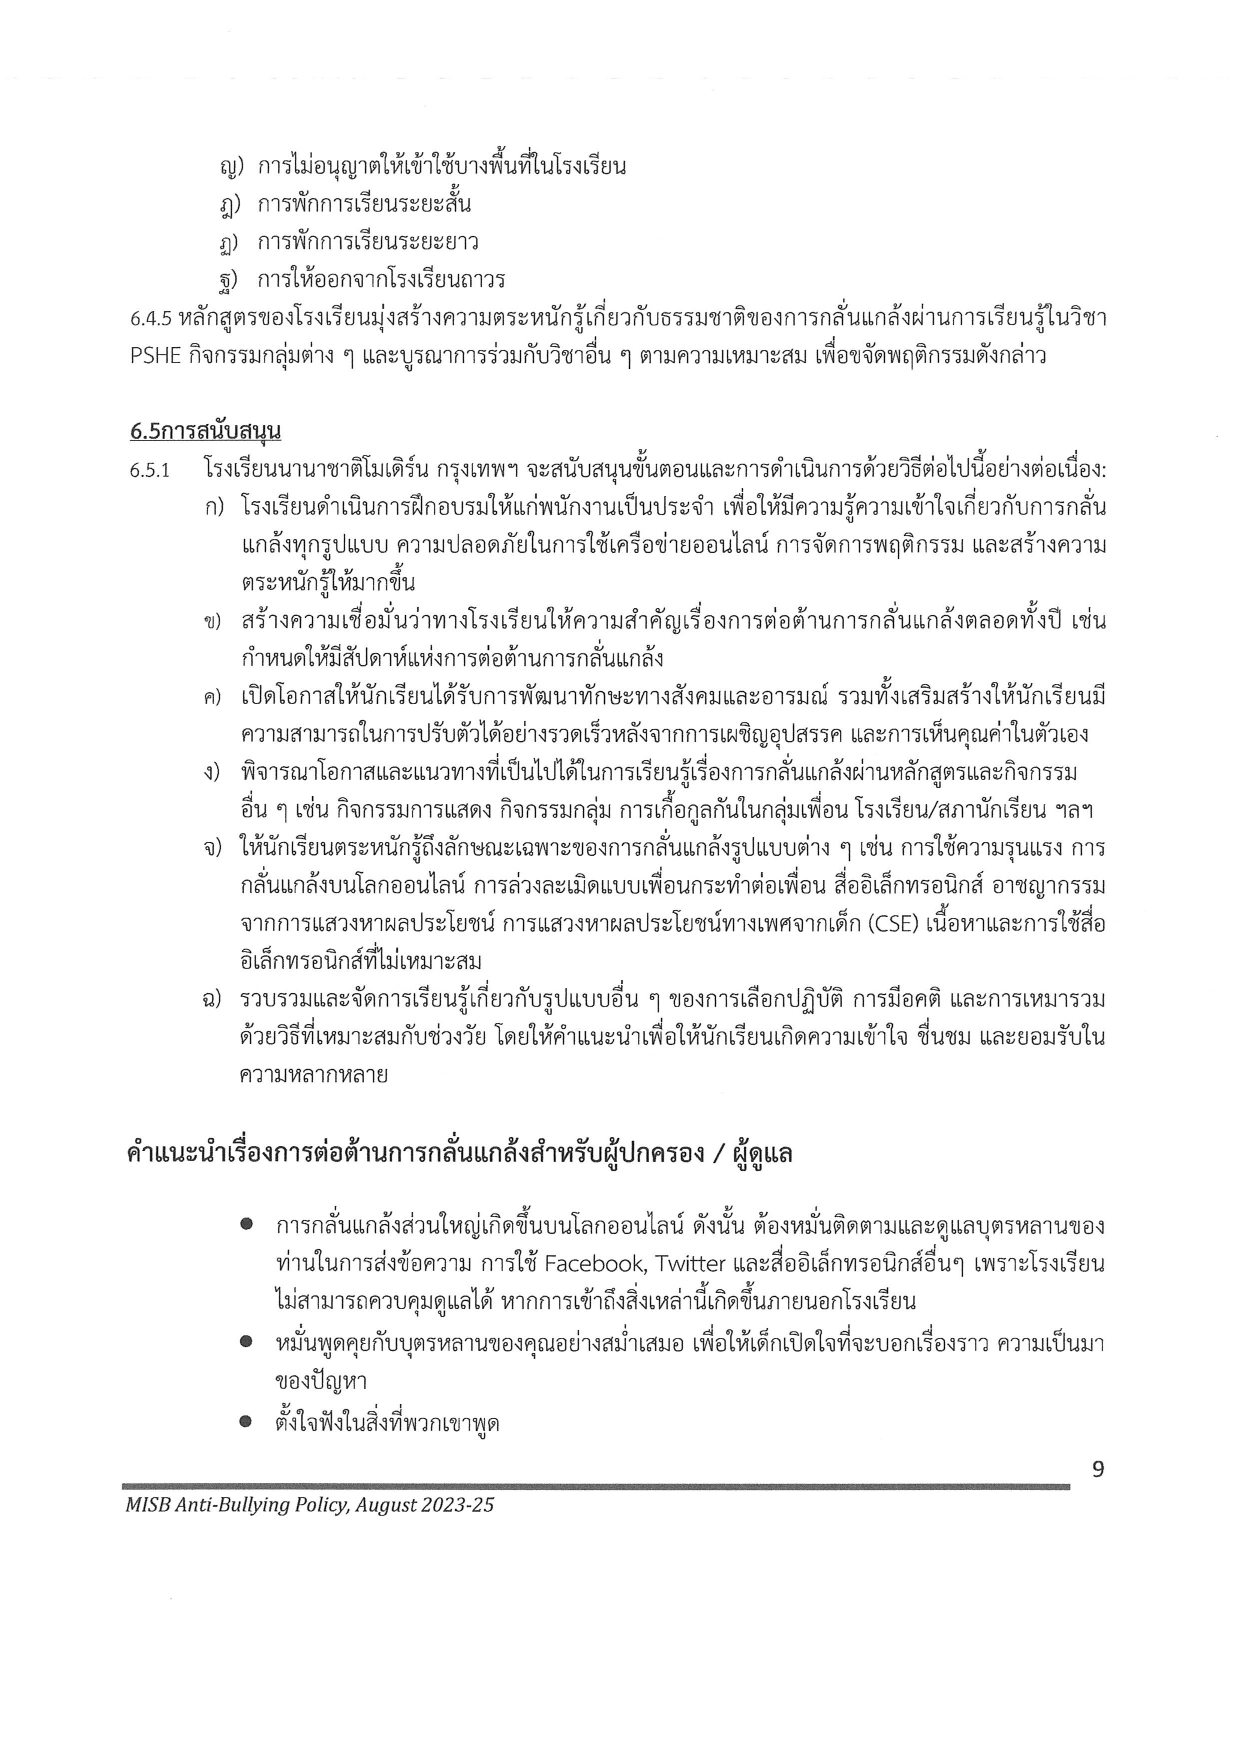 Anti Bullying Policy 2023 2025 Thai page 0011